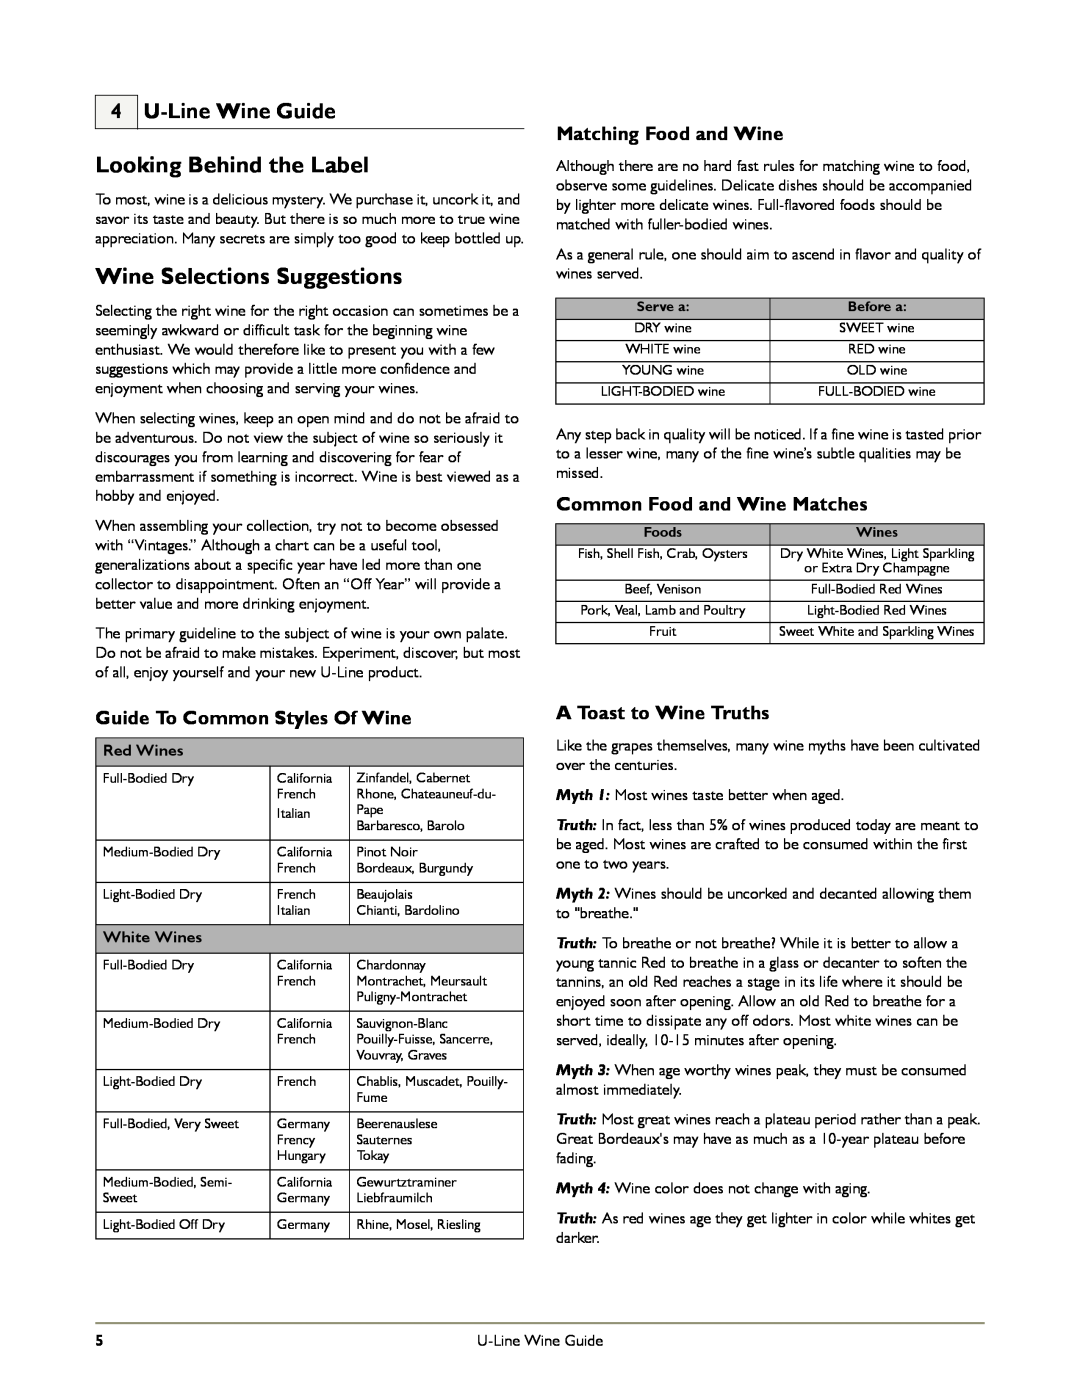 U-Line U-1075WCS-02 manual Looking Behind the Label, Wine Selections Suggestions, U-Line Wine Guide, Matching Food and Wine 